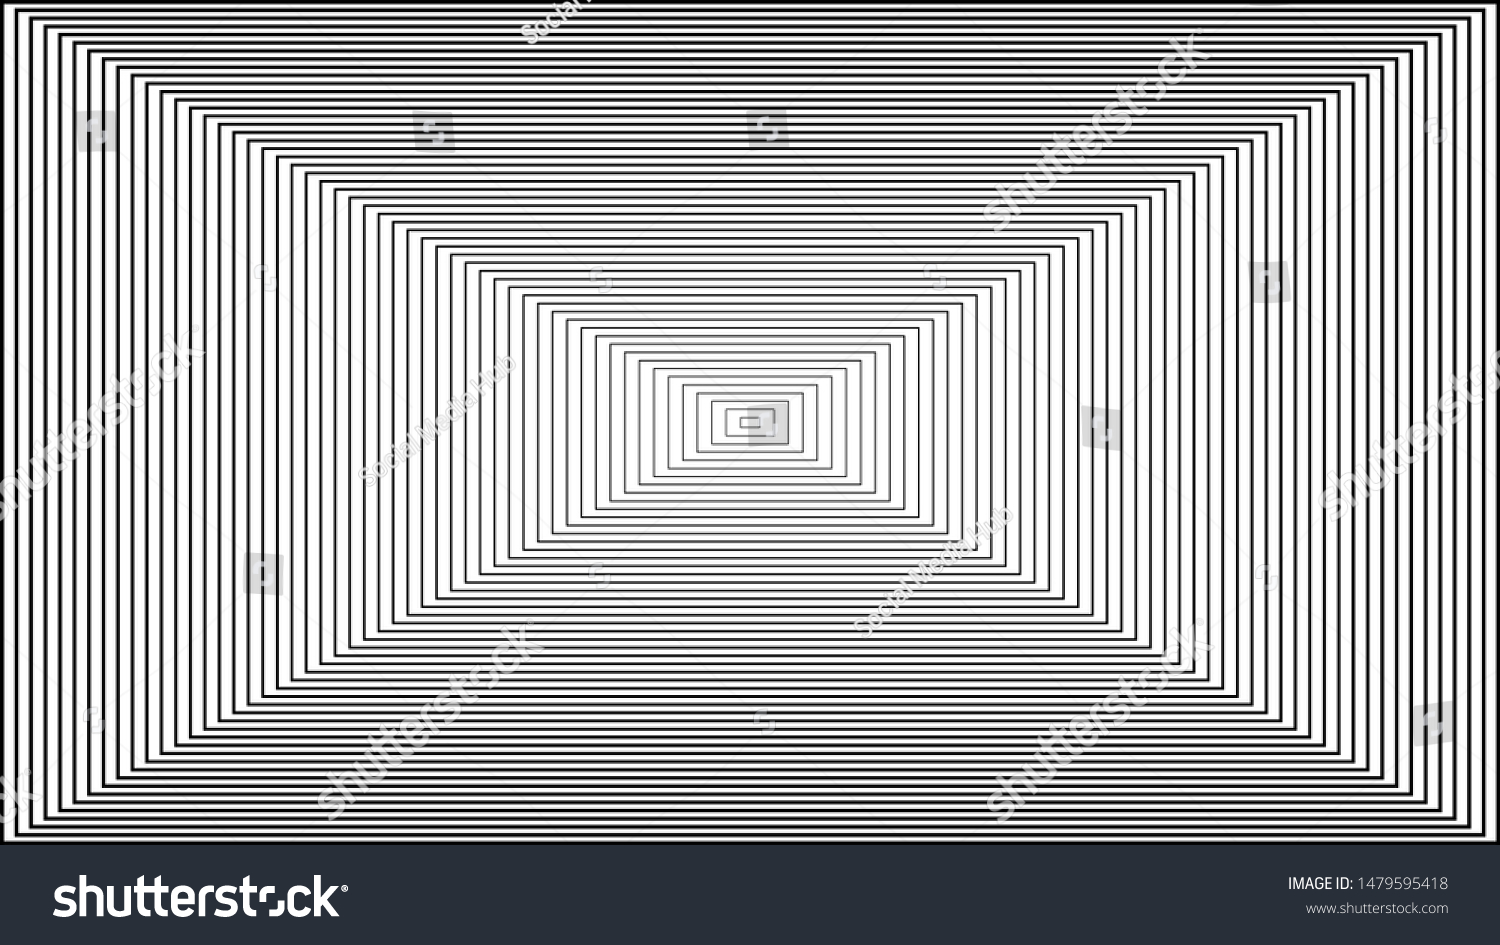 Rectangle Vector Illustration On White Background Stock Vector (Royalty ...